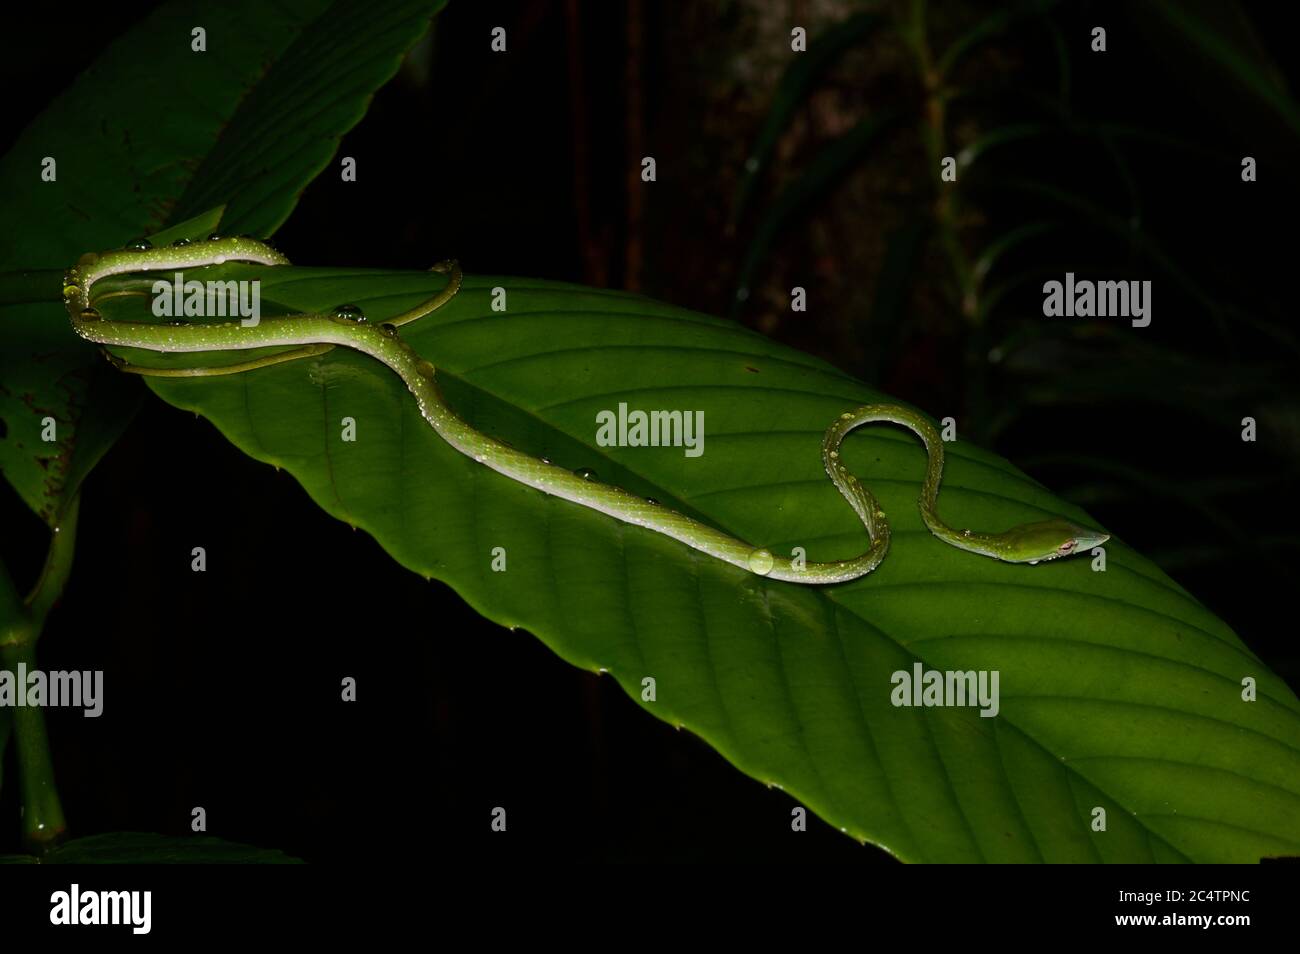 A juvenile Long-nosed Whipsnake (Ahaetulla nasuta) drinking from a wet leaf at night in the lowland rainforest of Kalutara, Sri Lanka Stock Photo